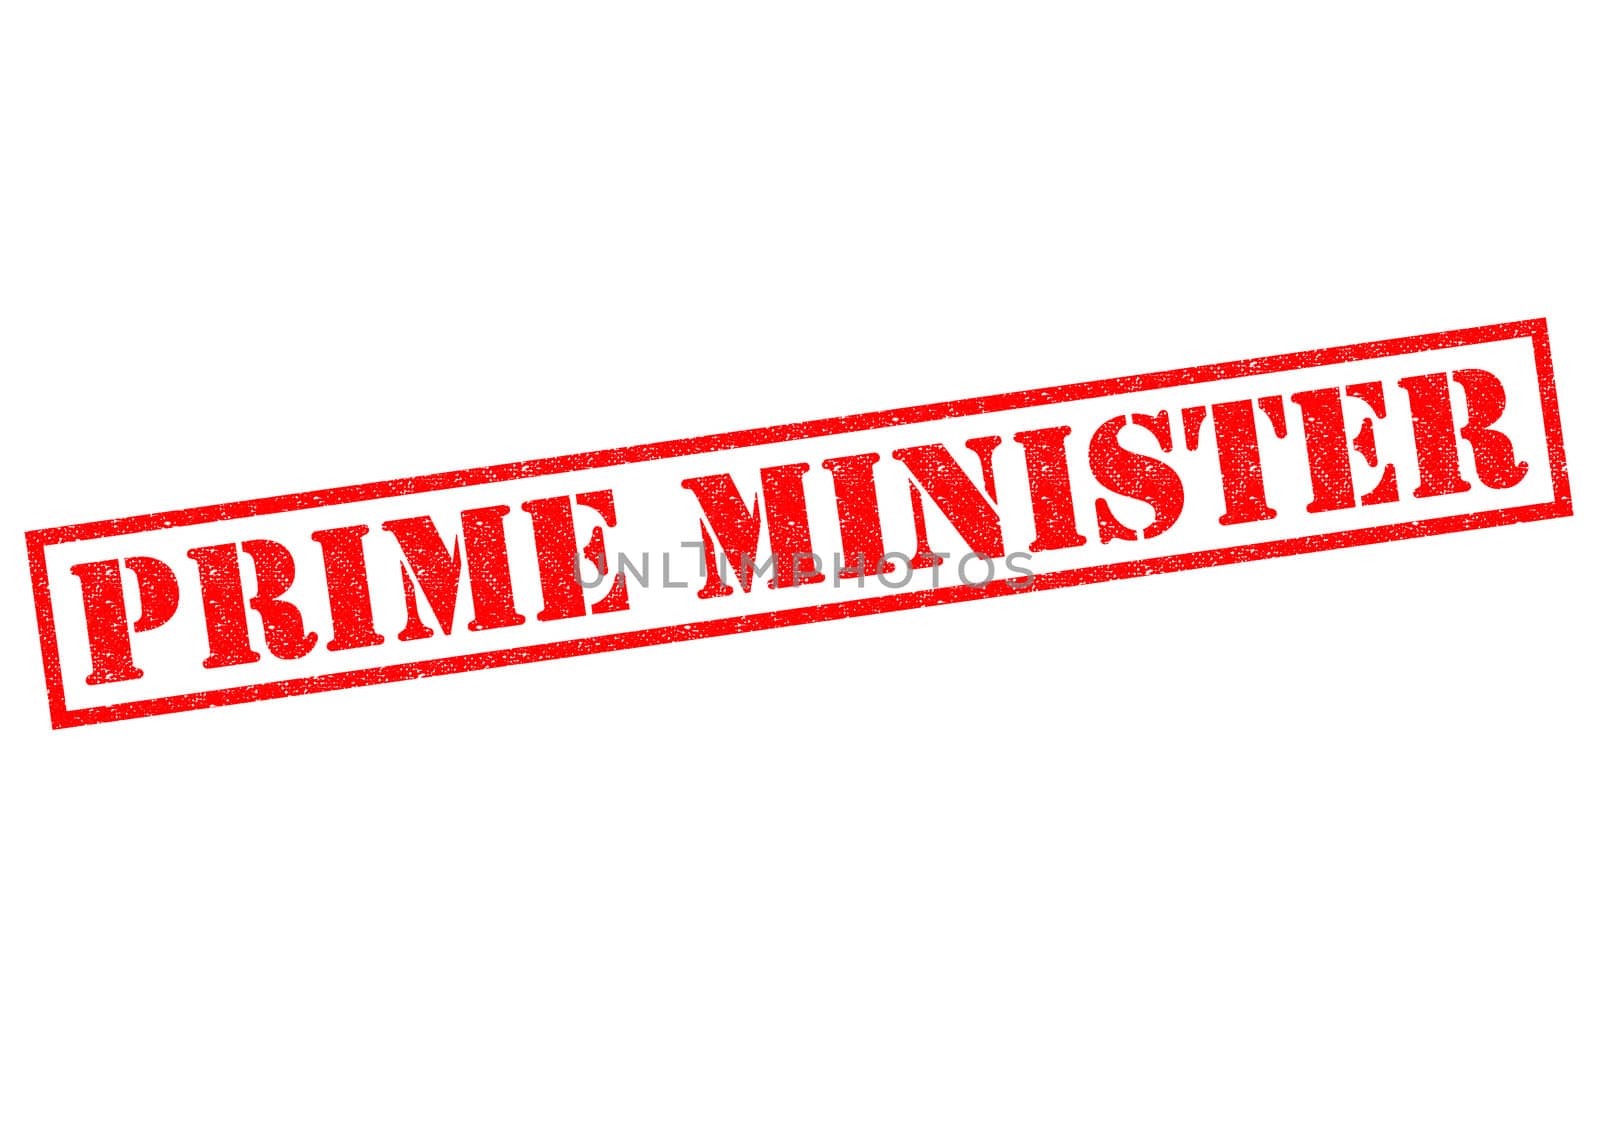 PRIME MINISTER red Rubber Stamp over a white background.